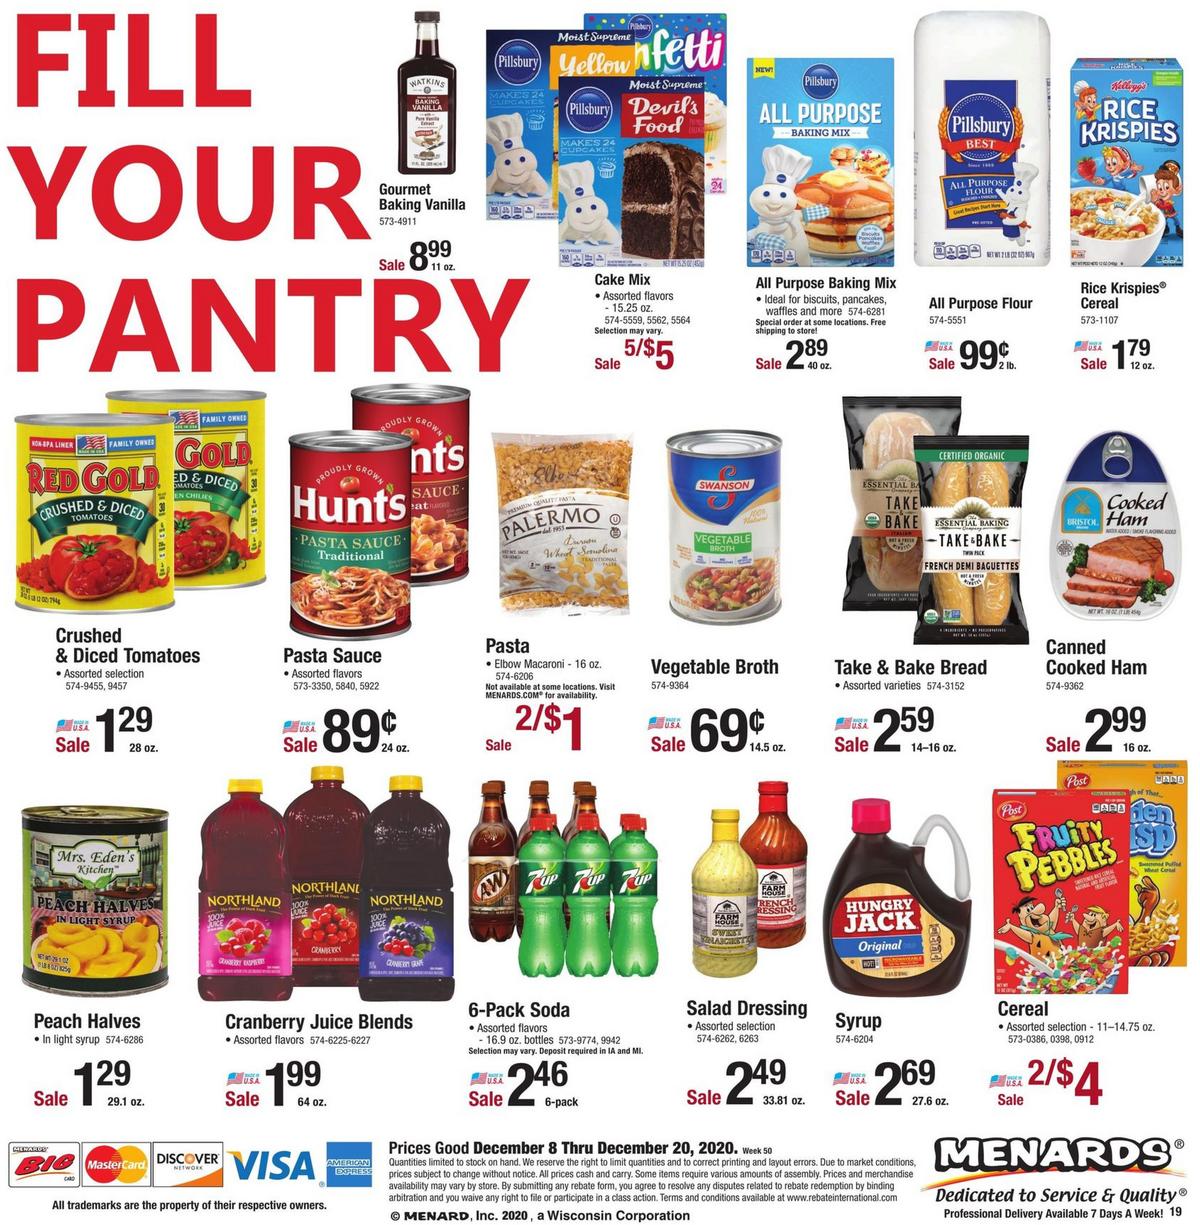 Menards Your Home Improvement Store Weekly Ad from December 8